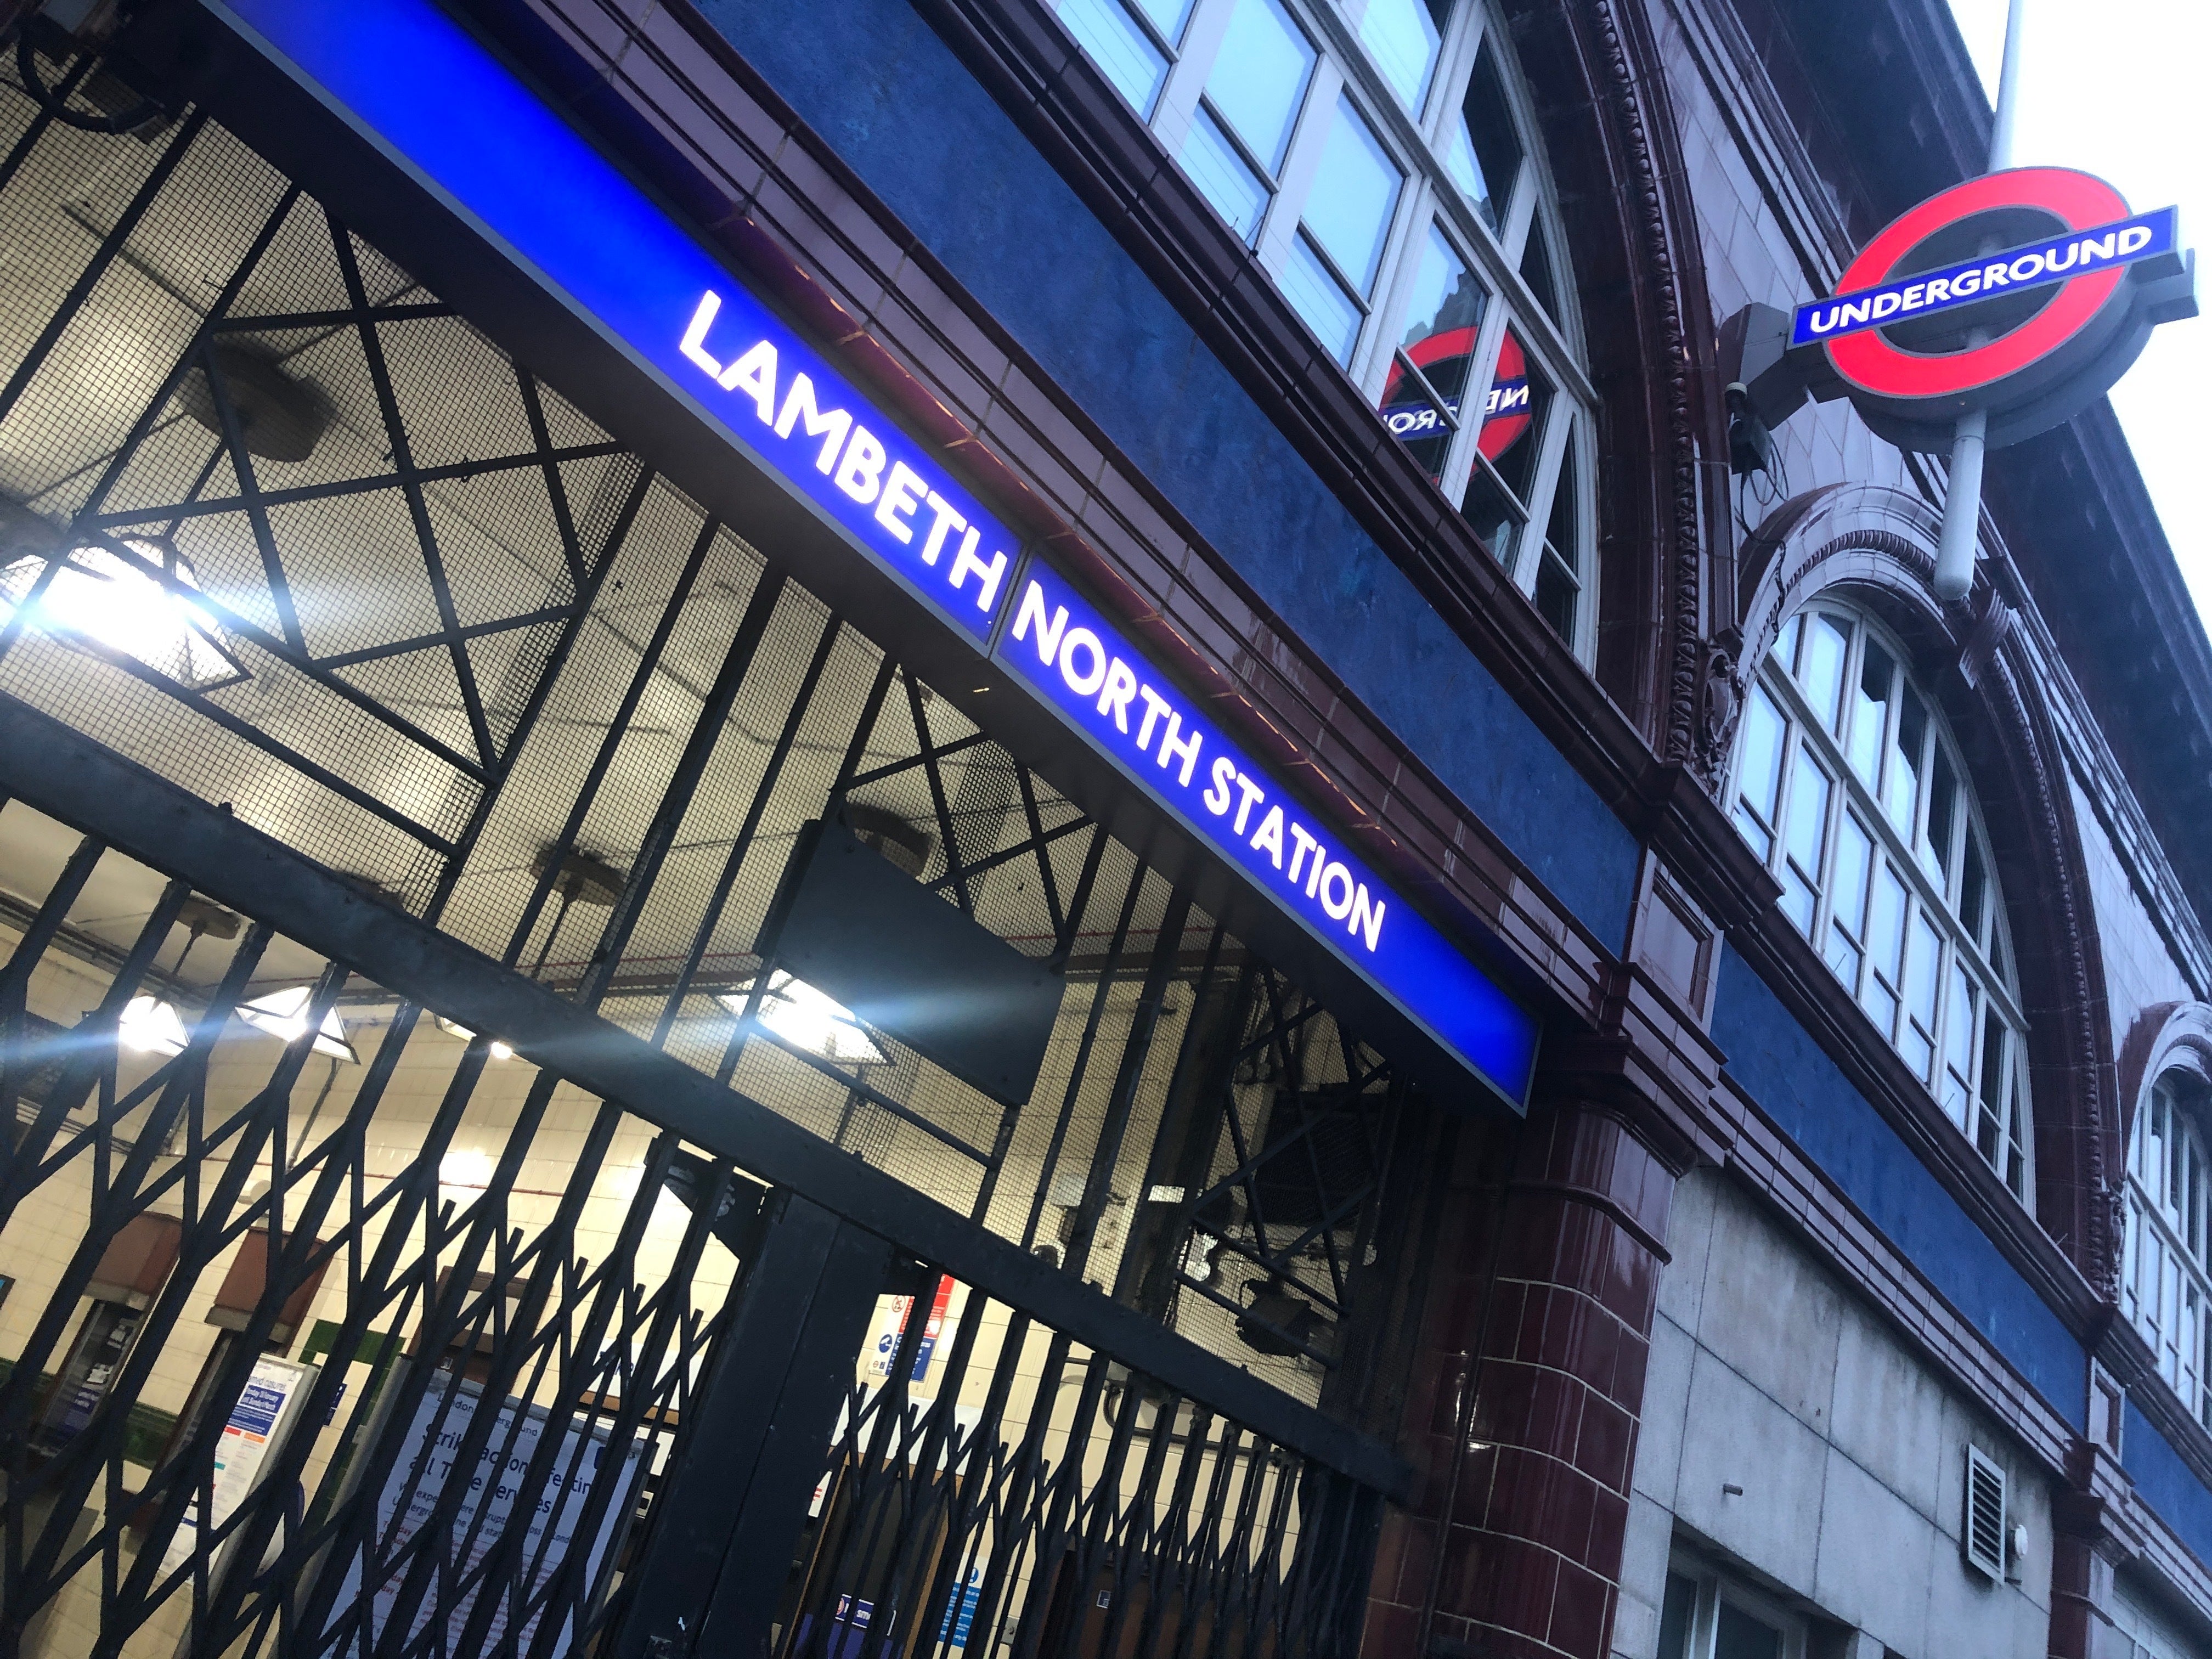 Lambeth North station, one of hundreds of Tube stations closed by the strike